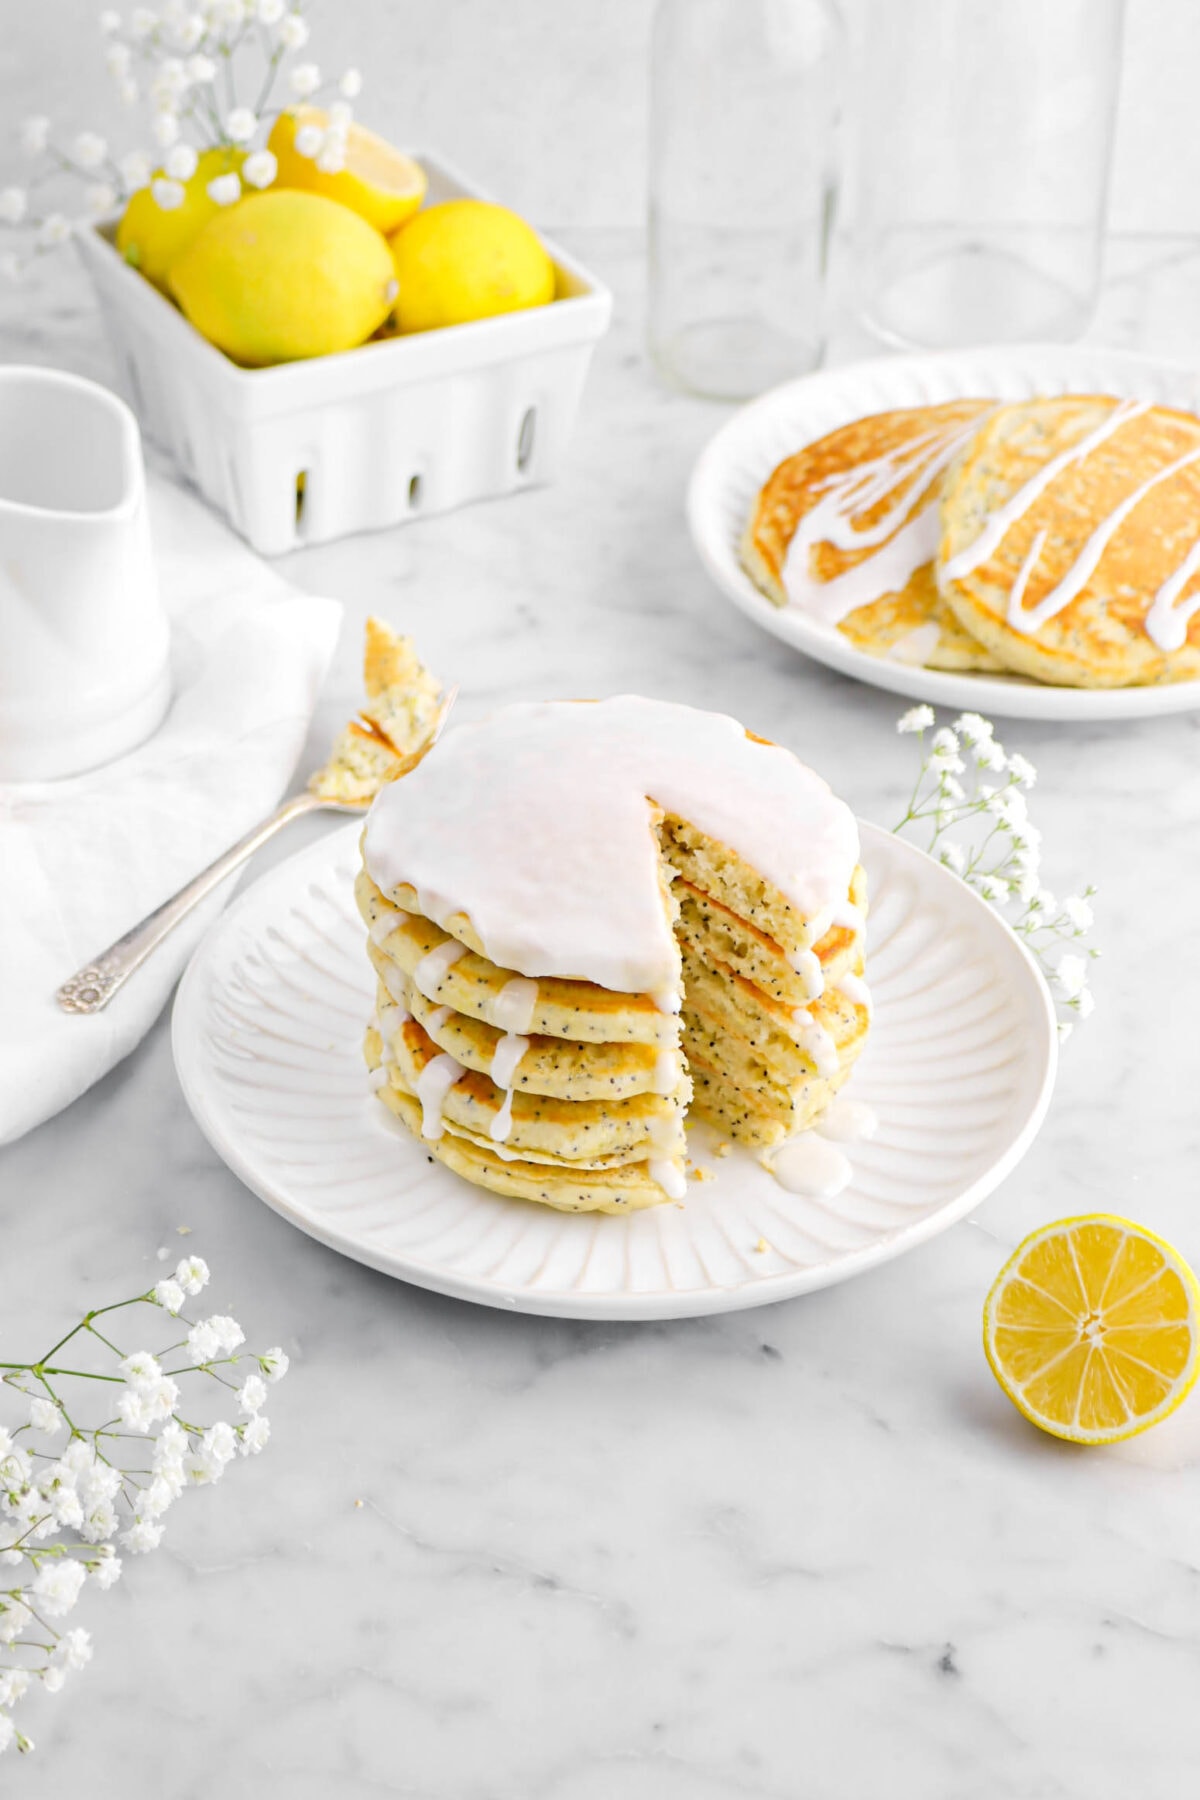 angled photo of sliced stacked pancakes with icing on top, a forkful of pancake beside, more pancakes behind on white plate, with flowers and lemons behind on marble surface.